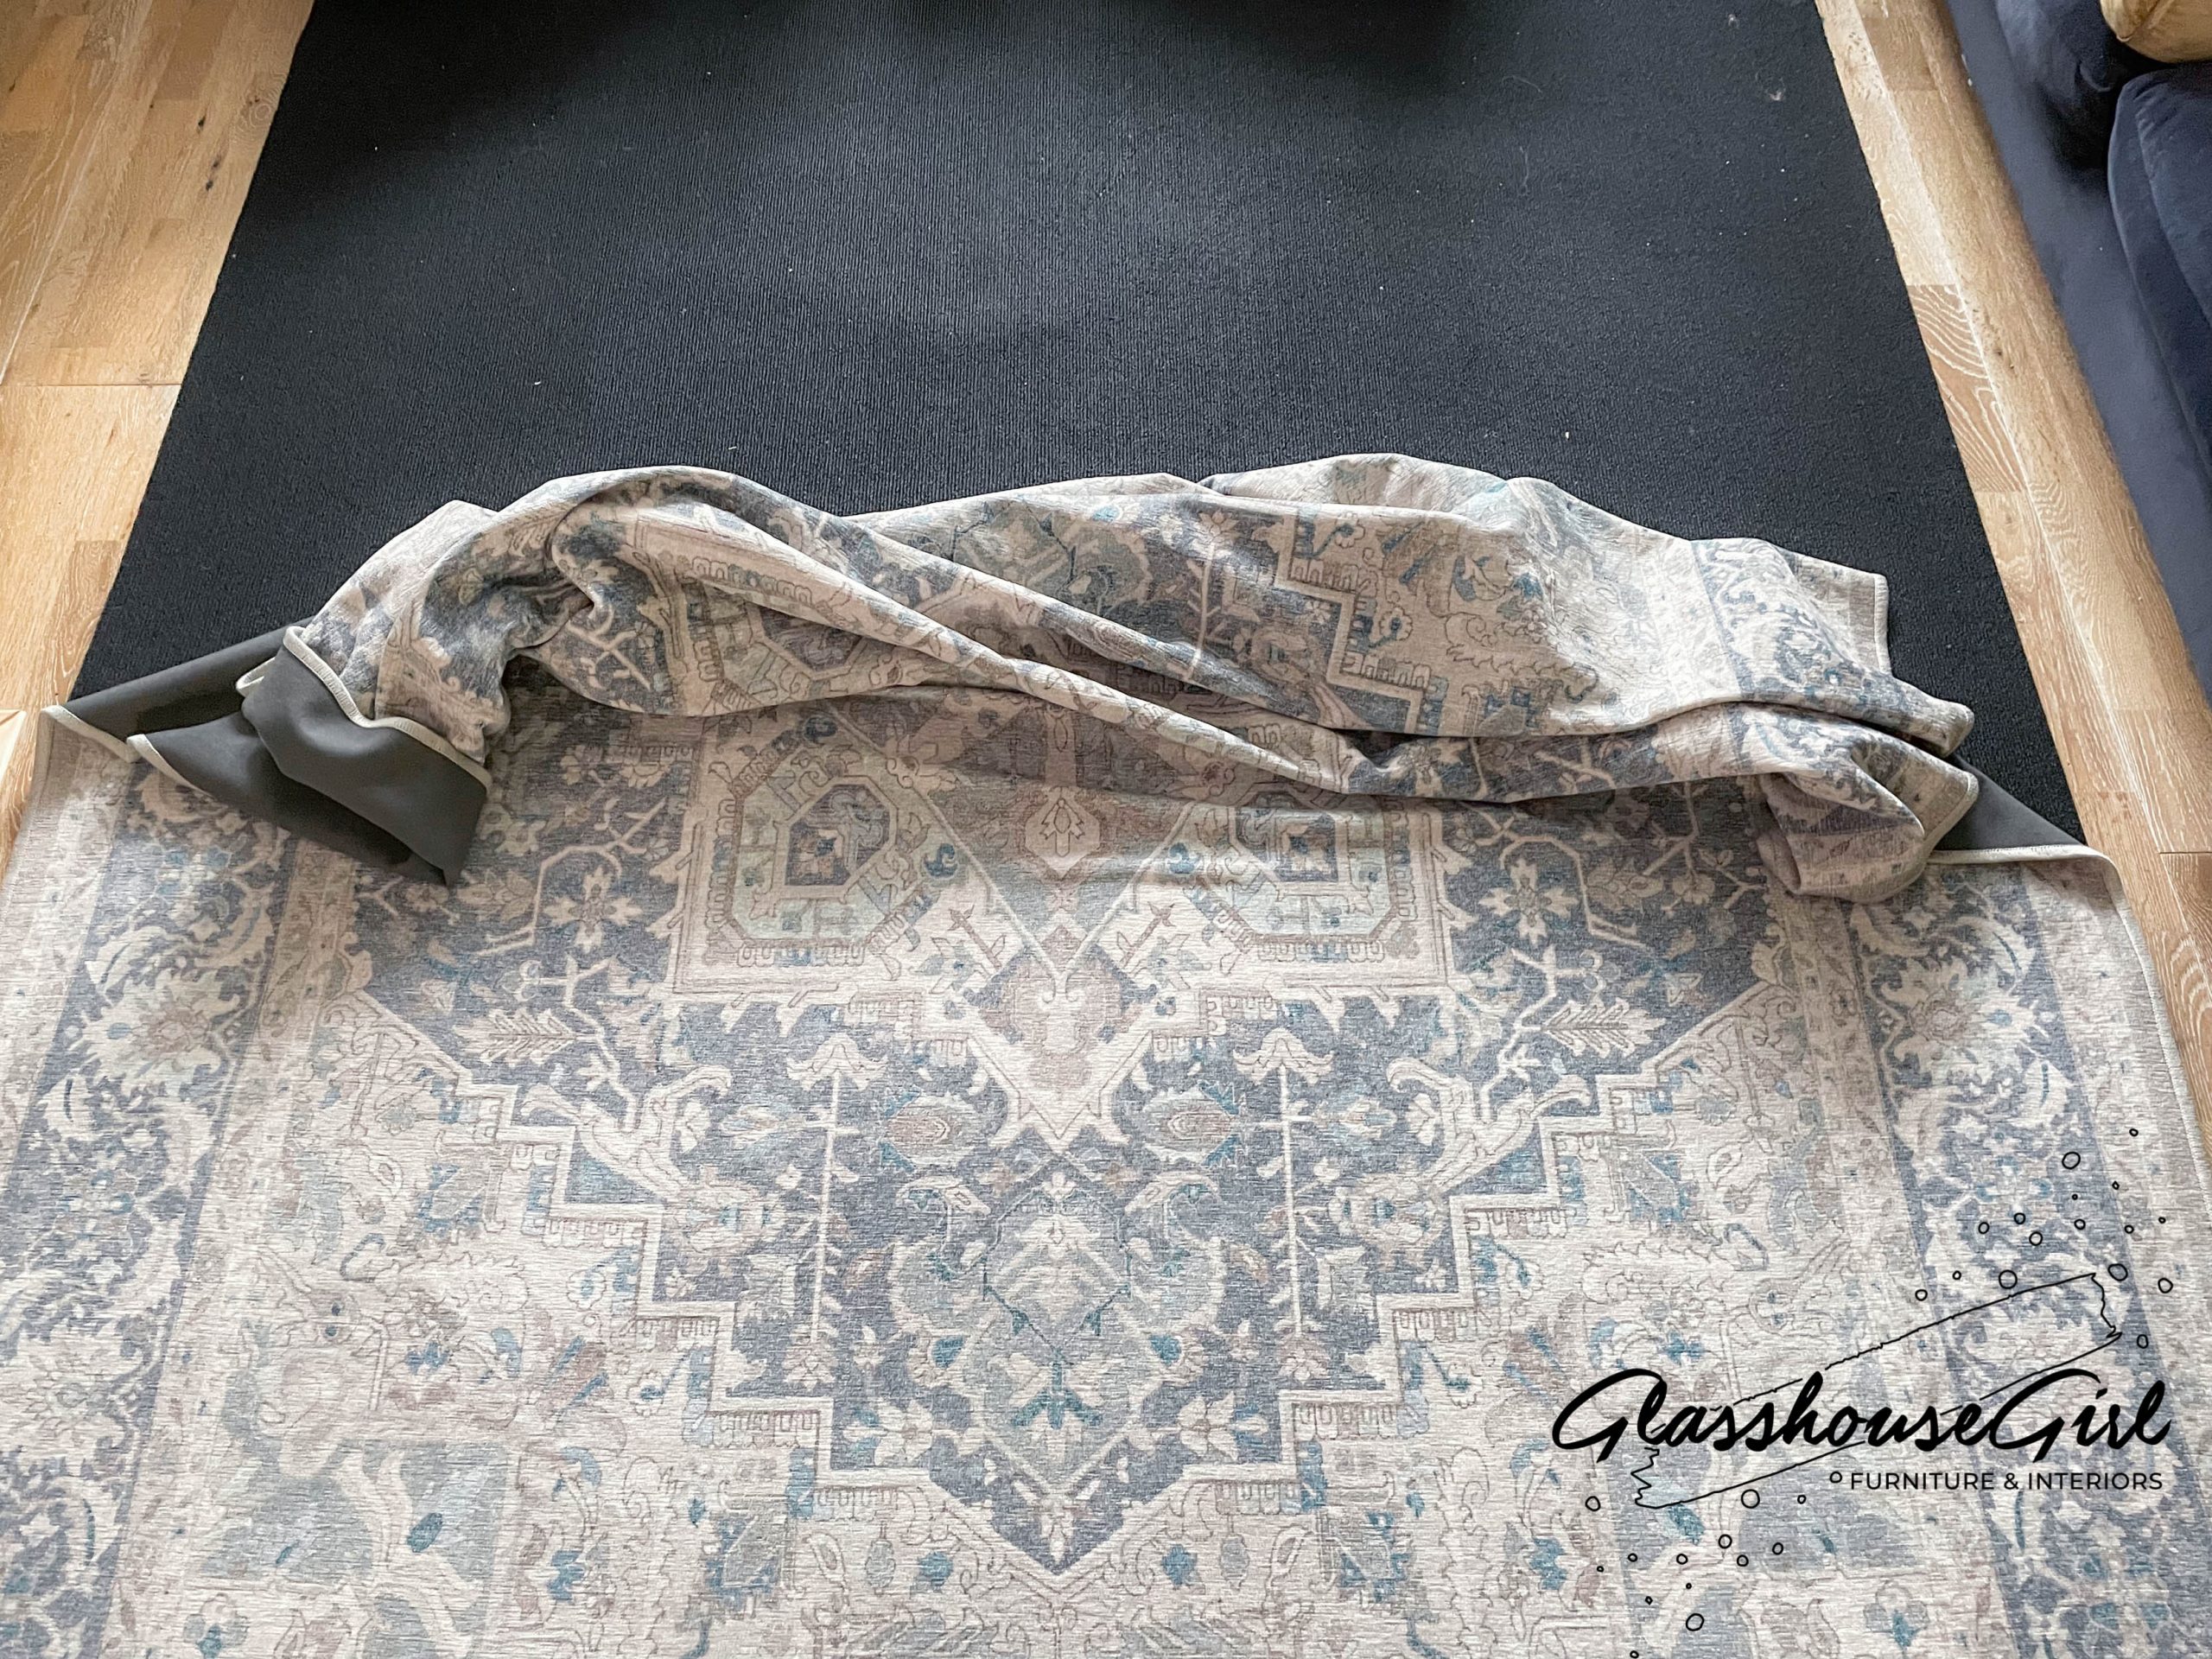 Product Review: Ruggable - Washable Rug - Do They Work